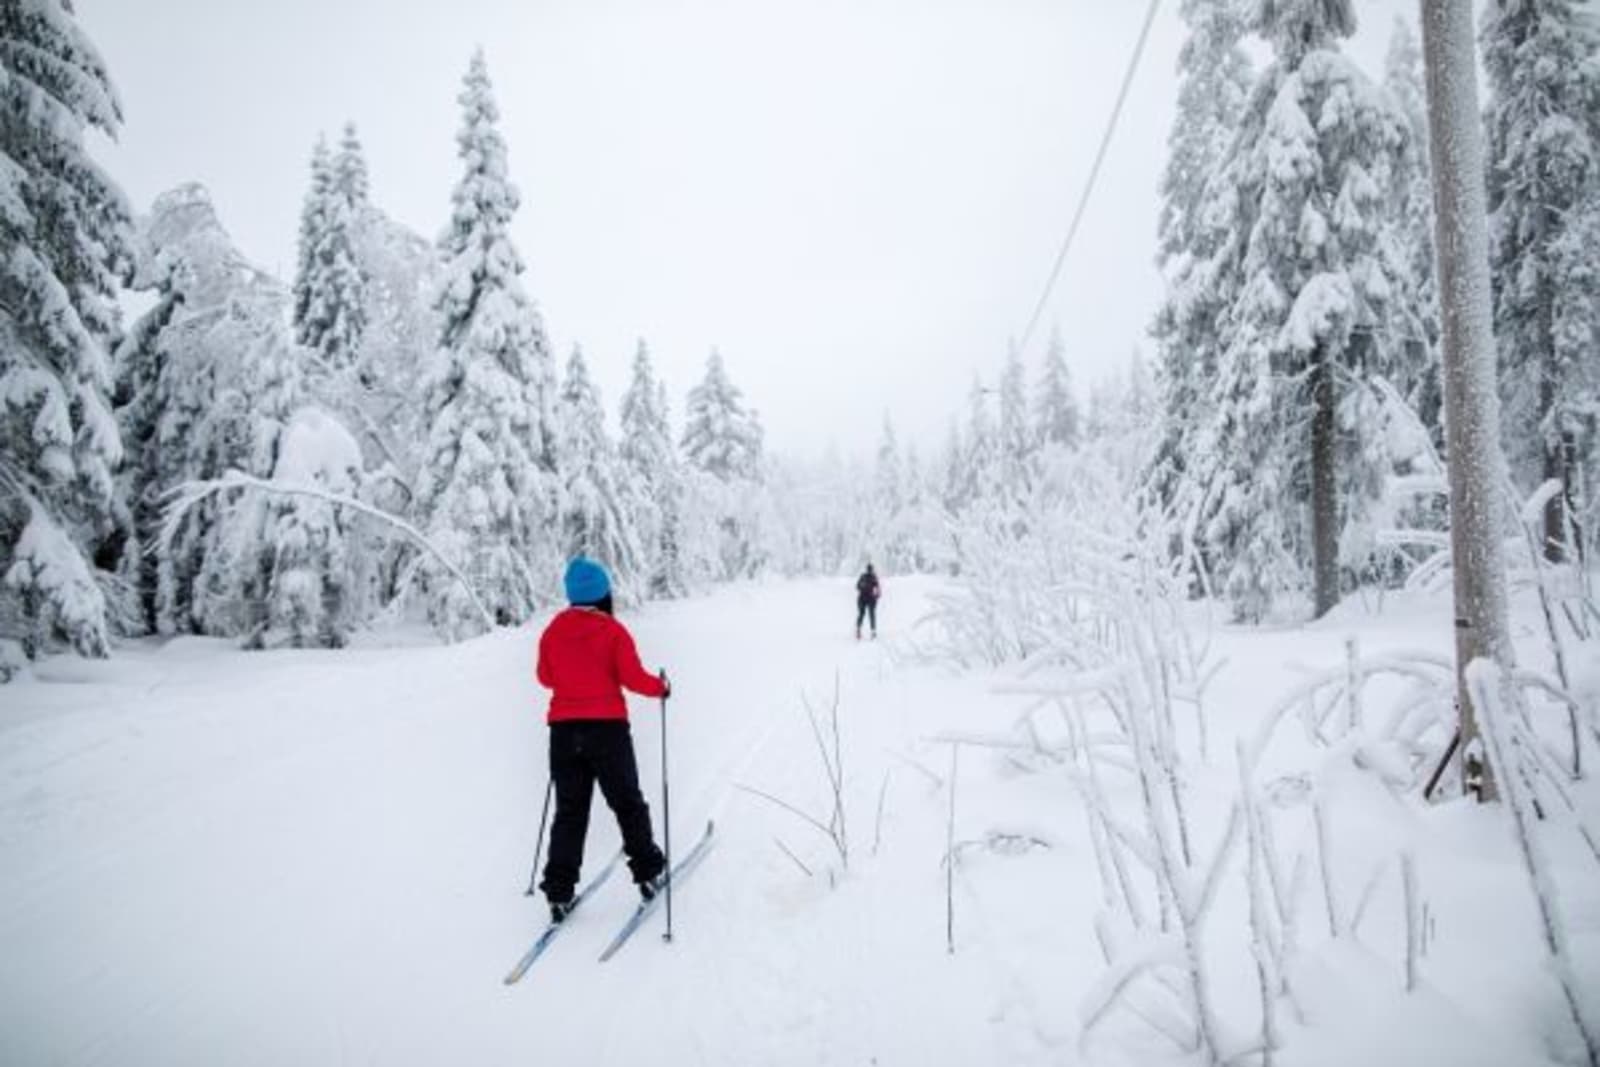 People skiing through ski field surrounded by snowy trees